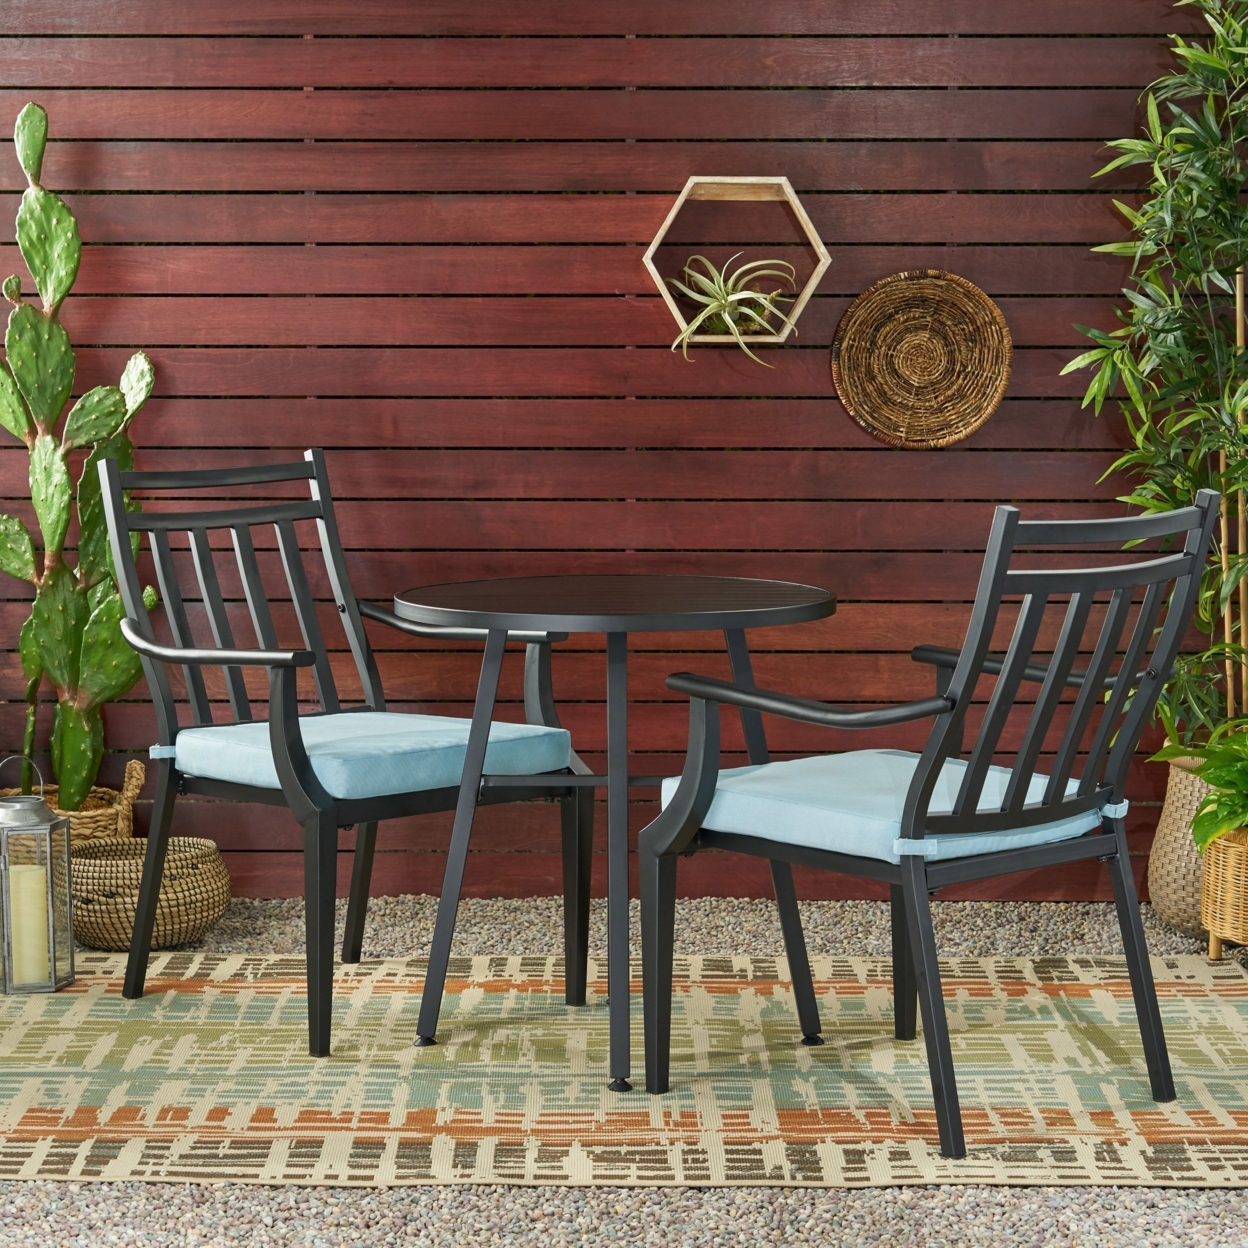 Olive Outdoor 3 Piece Bistro Set With Cushions - Beige